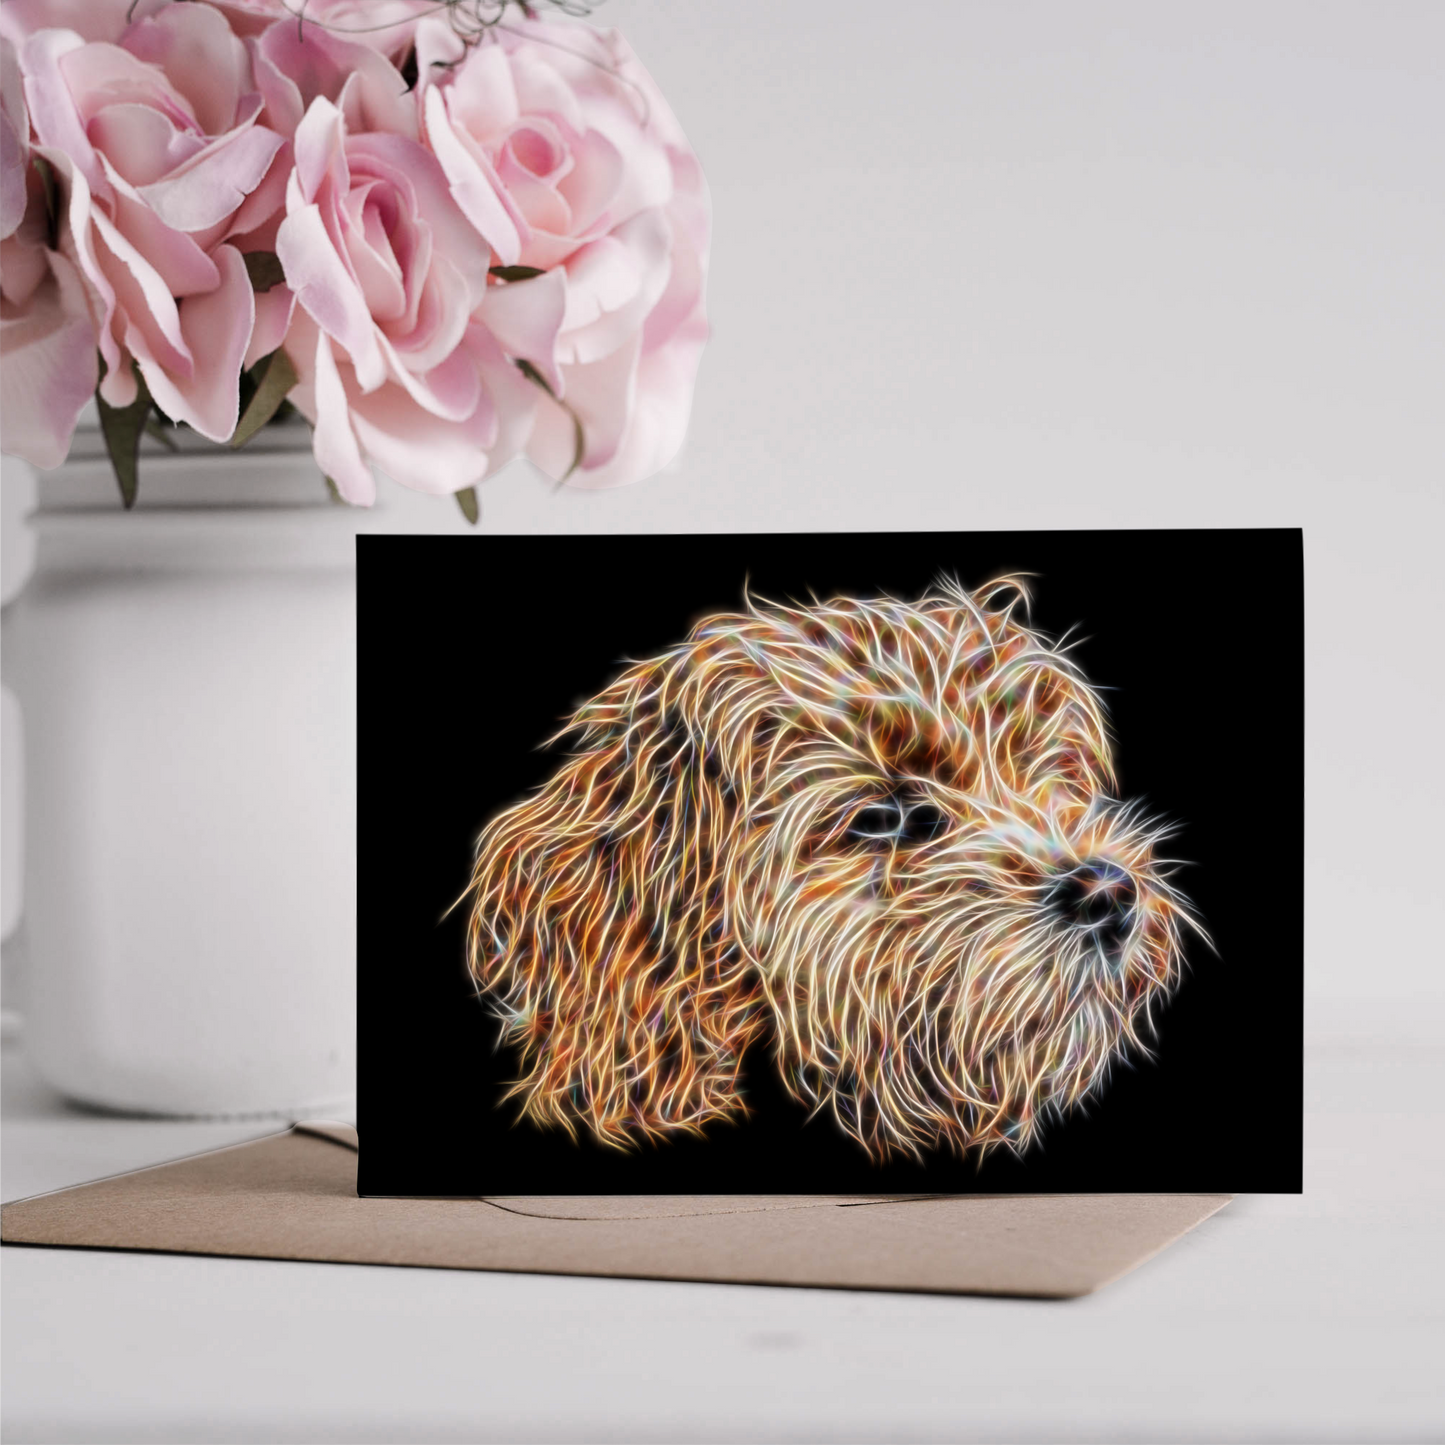 Apricot Cavapoo Greeting Card Blank Inside for Birthdays or any other Occasion